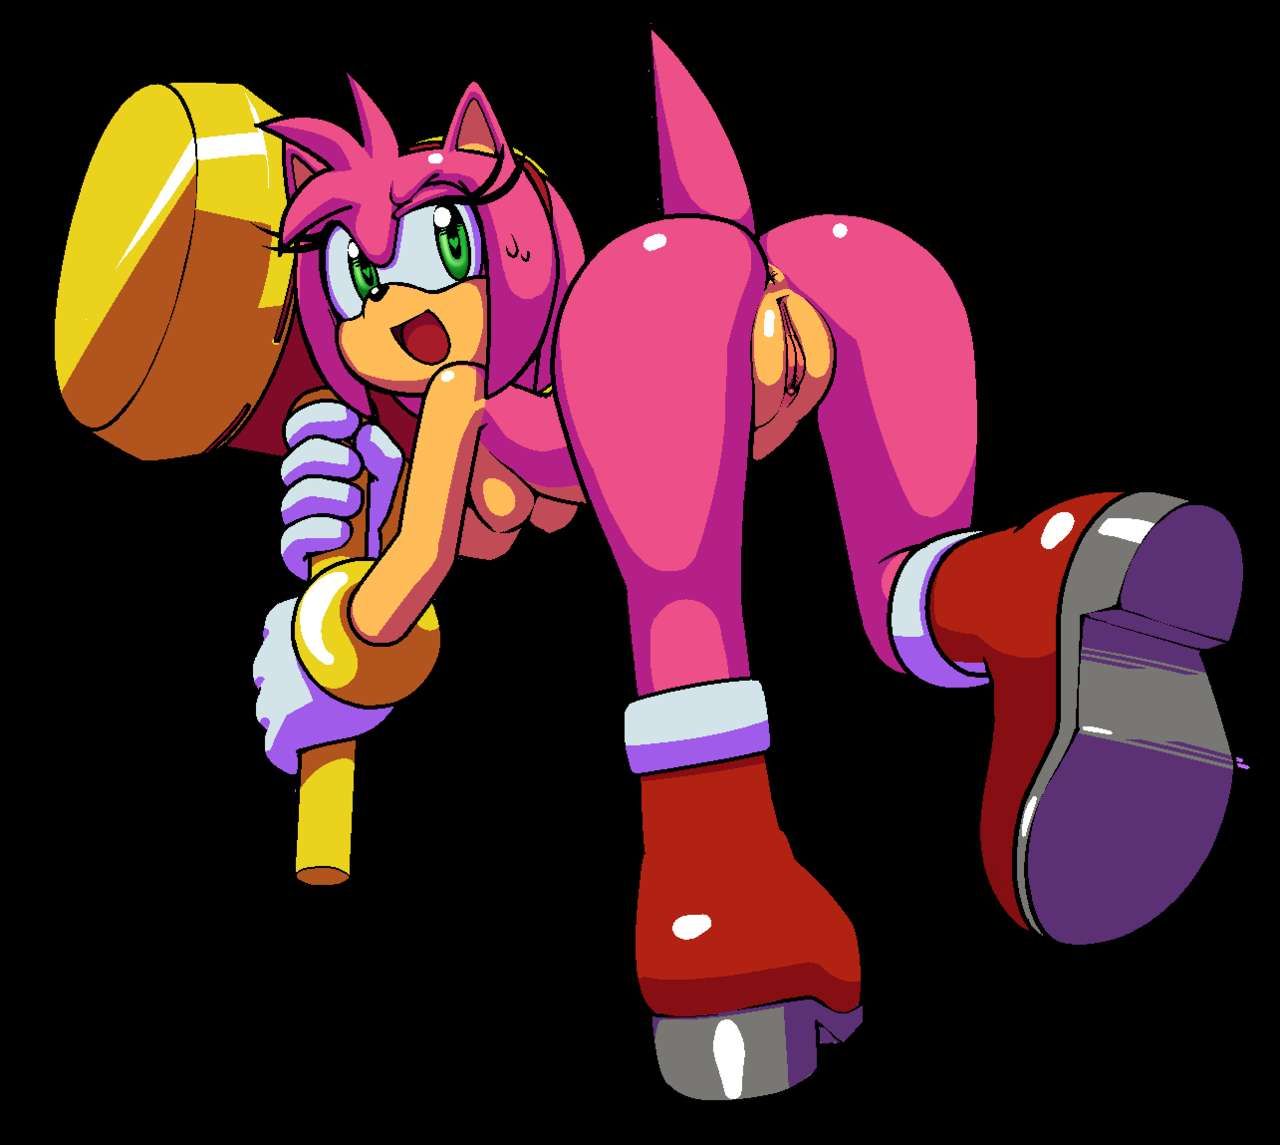 Amy Rose Collection - Hotred/isadultart 24